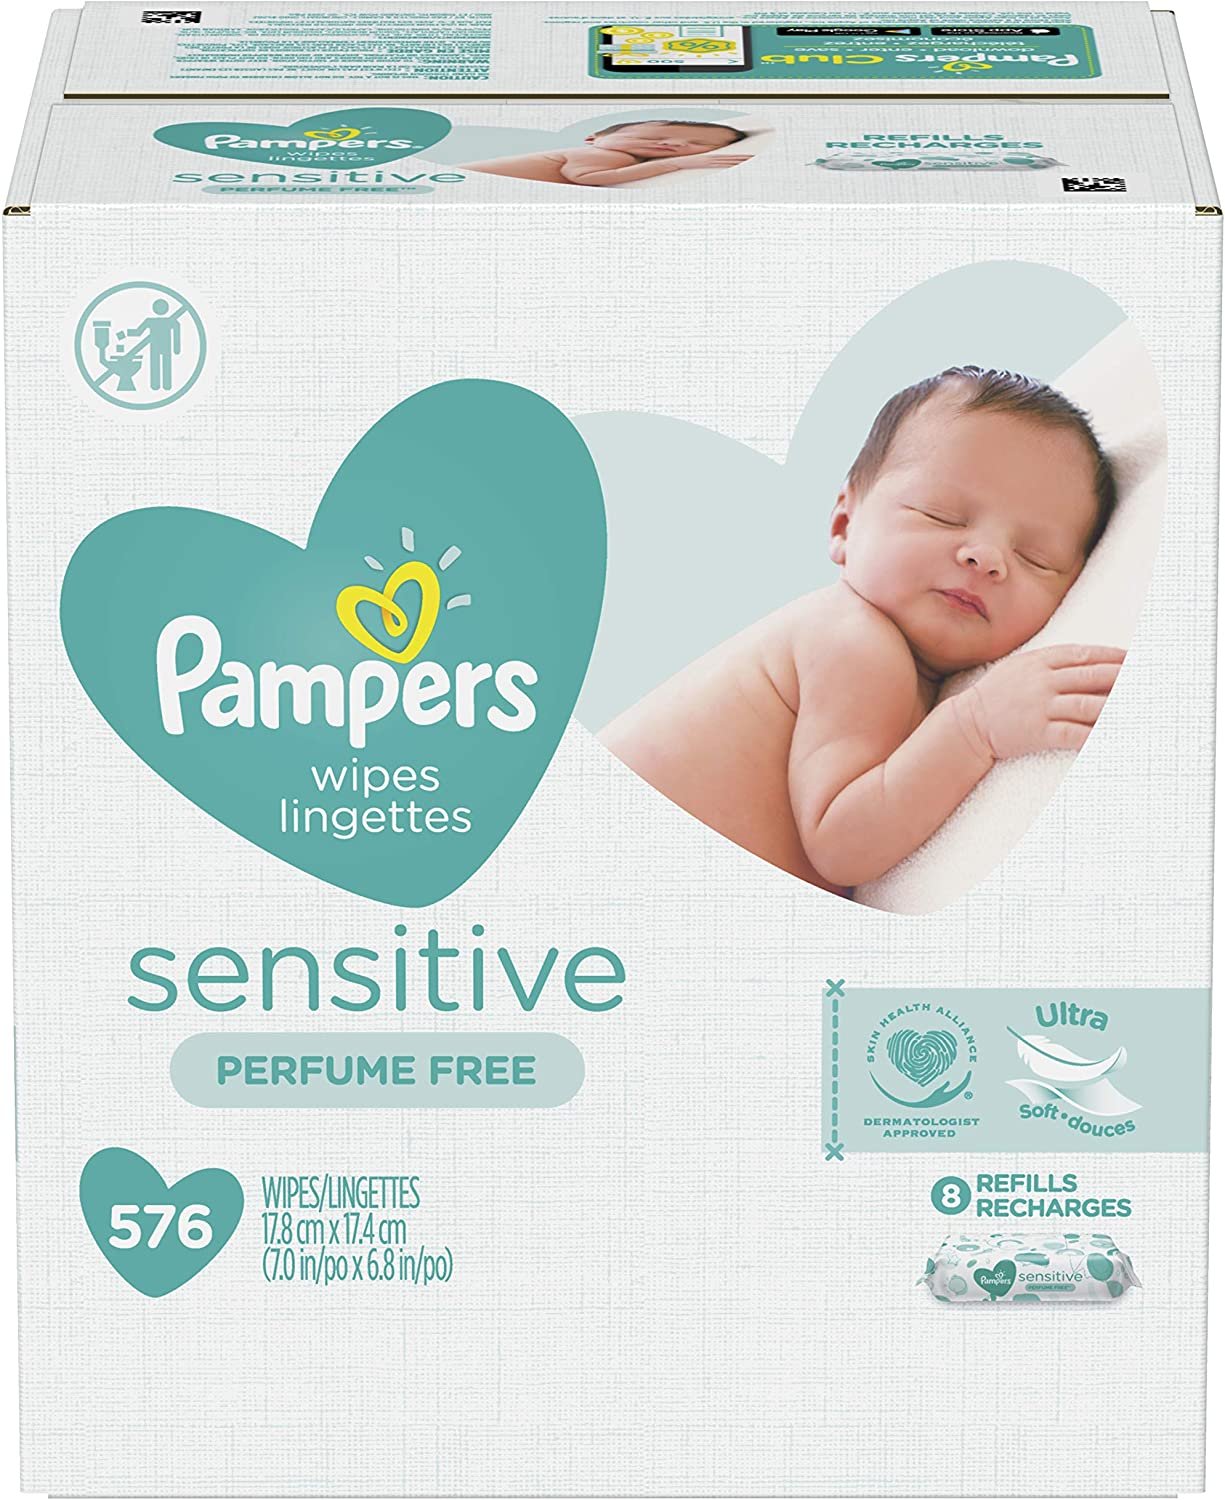 Pampers Baby Wipes Sensitive Perfume